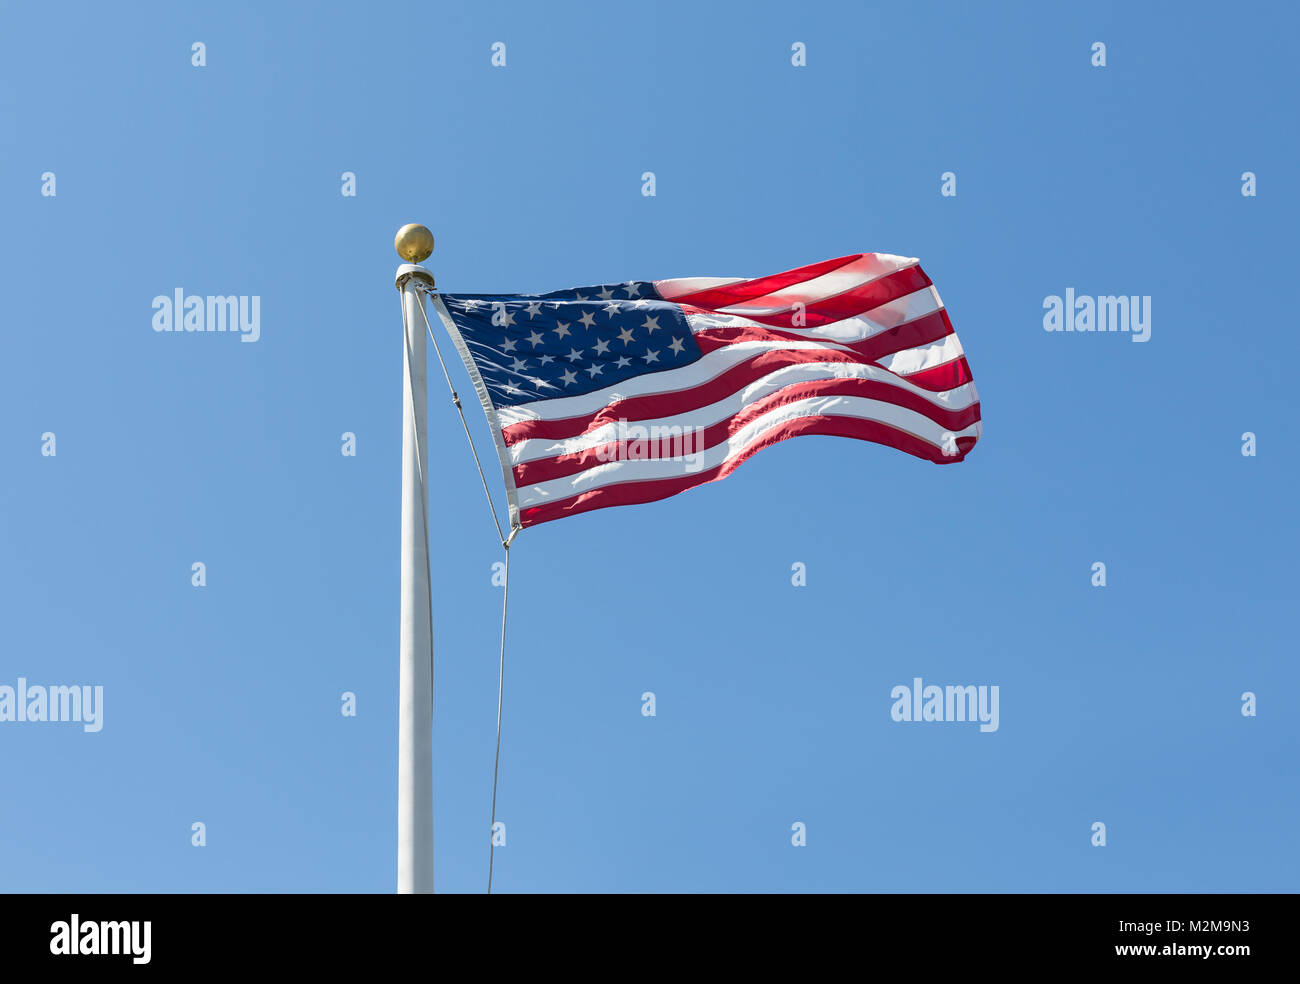 The United States flag on blue sky background, turned to the right Stock Photo